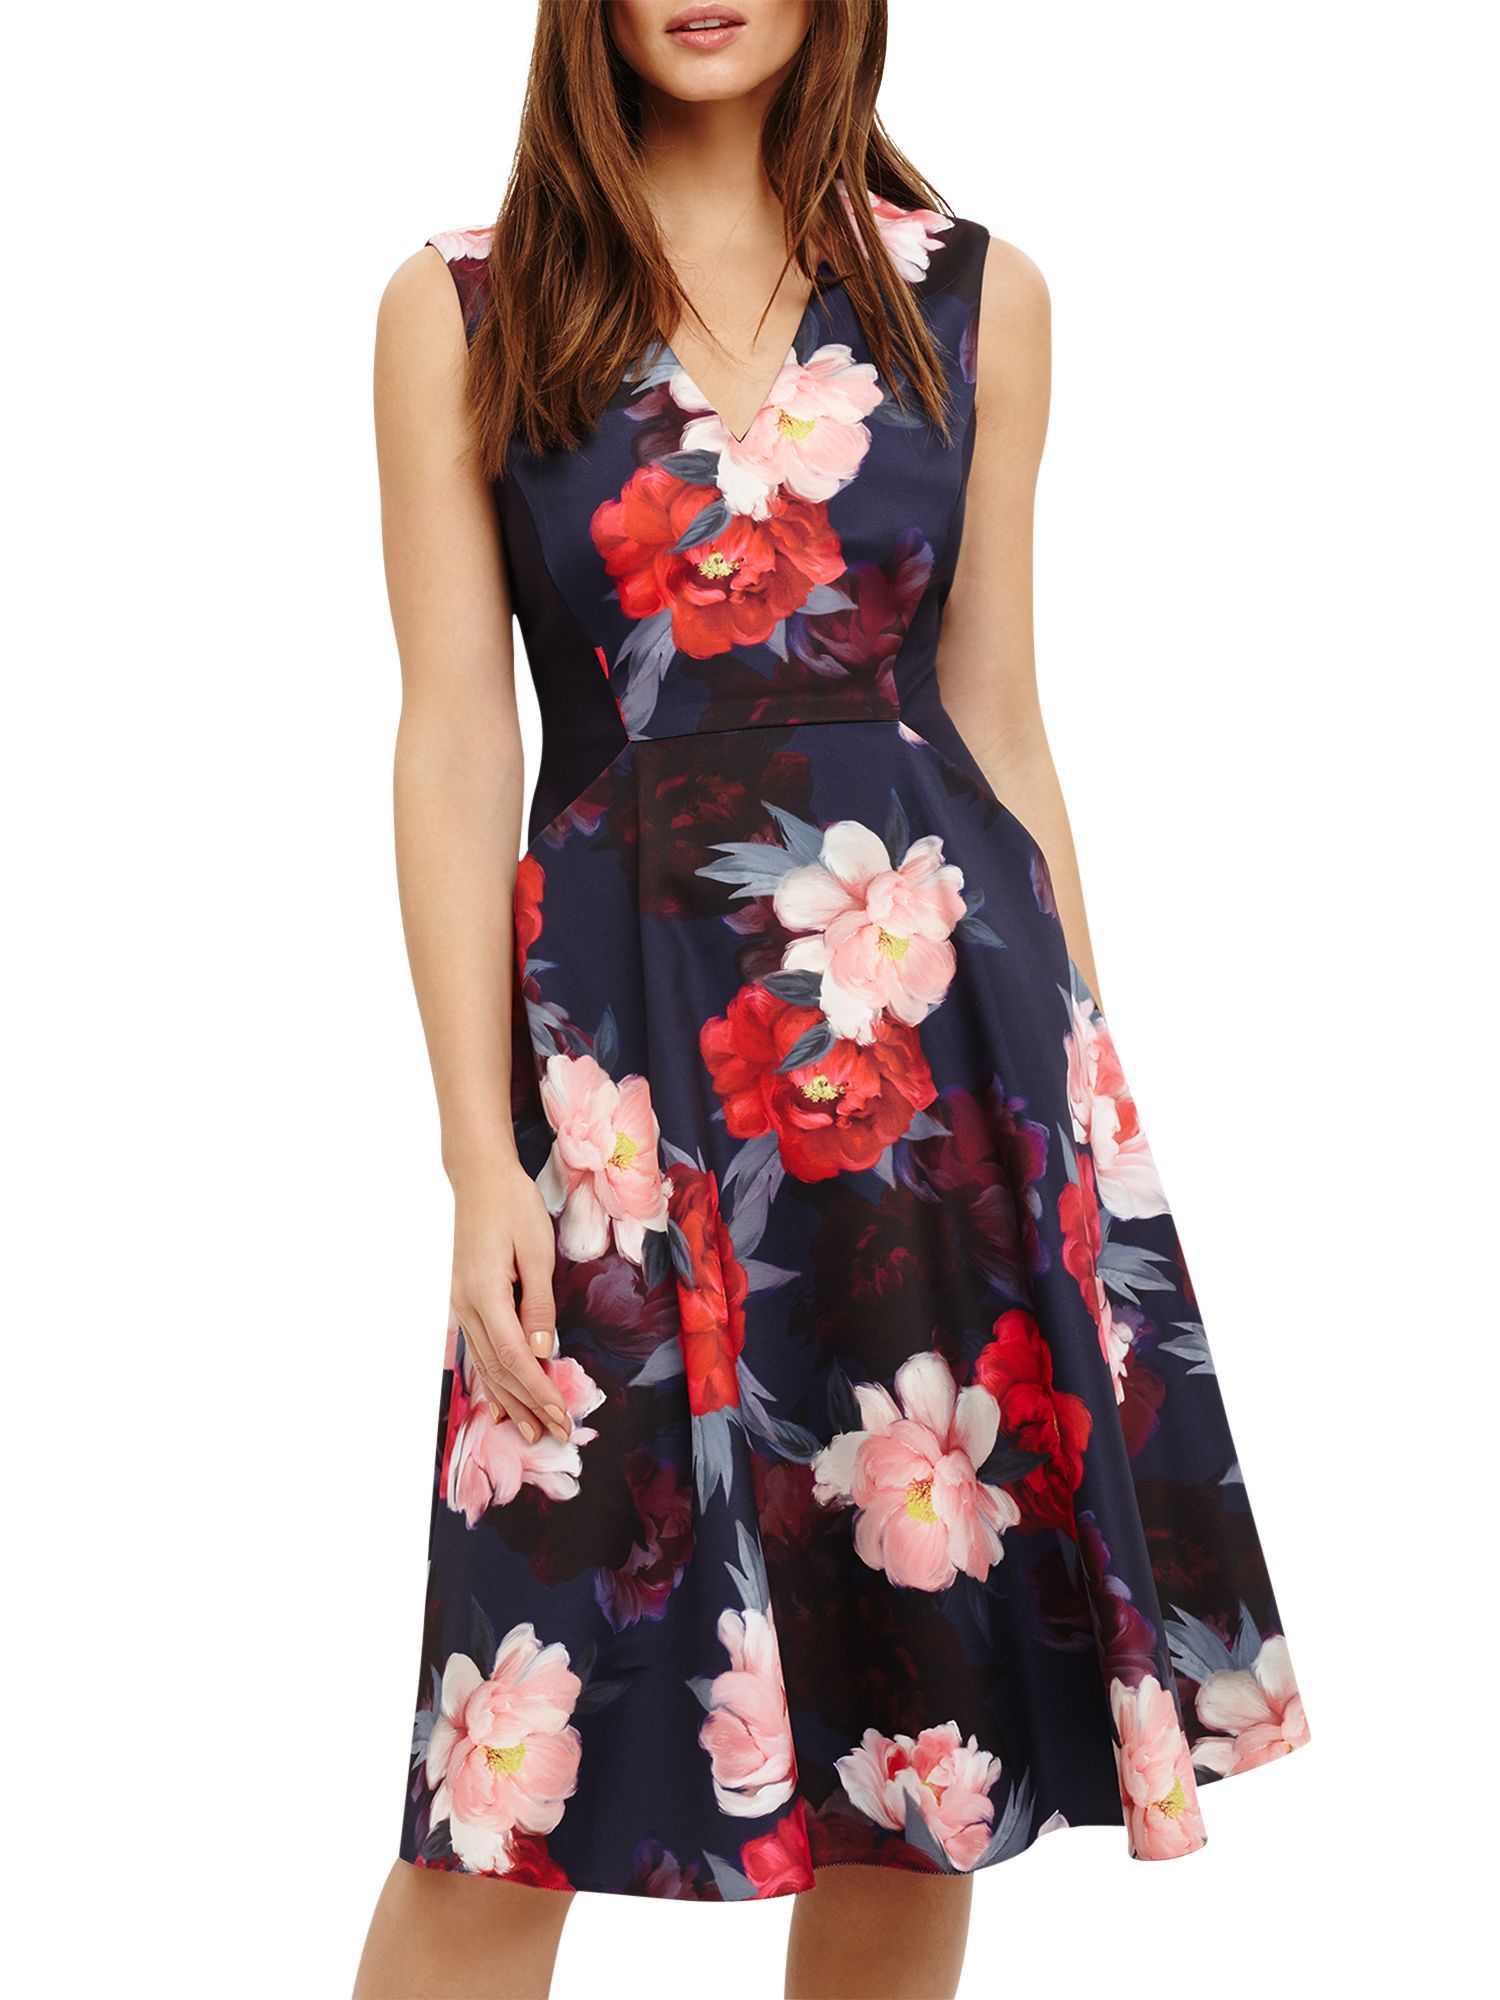 phase eight navy floral dress